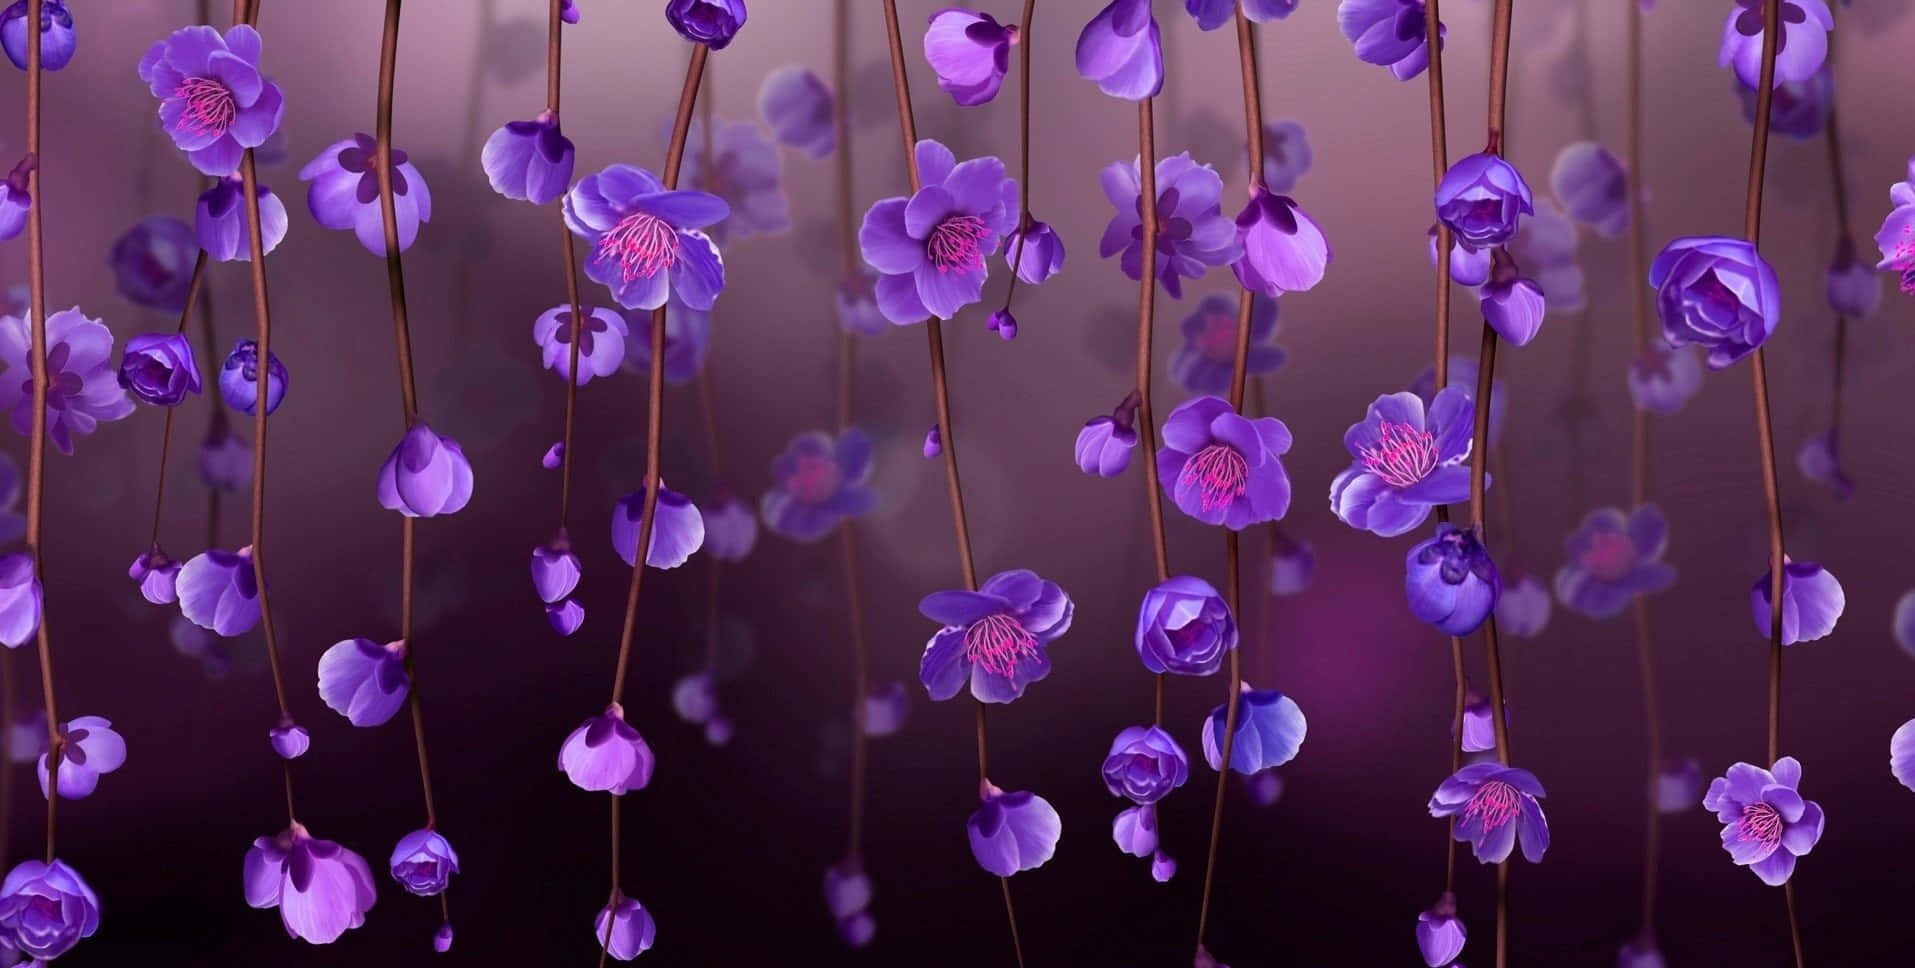 Purple Flowers Hanging From A Purple Curtain